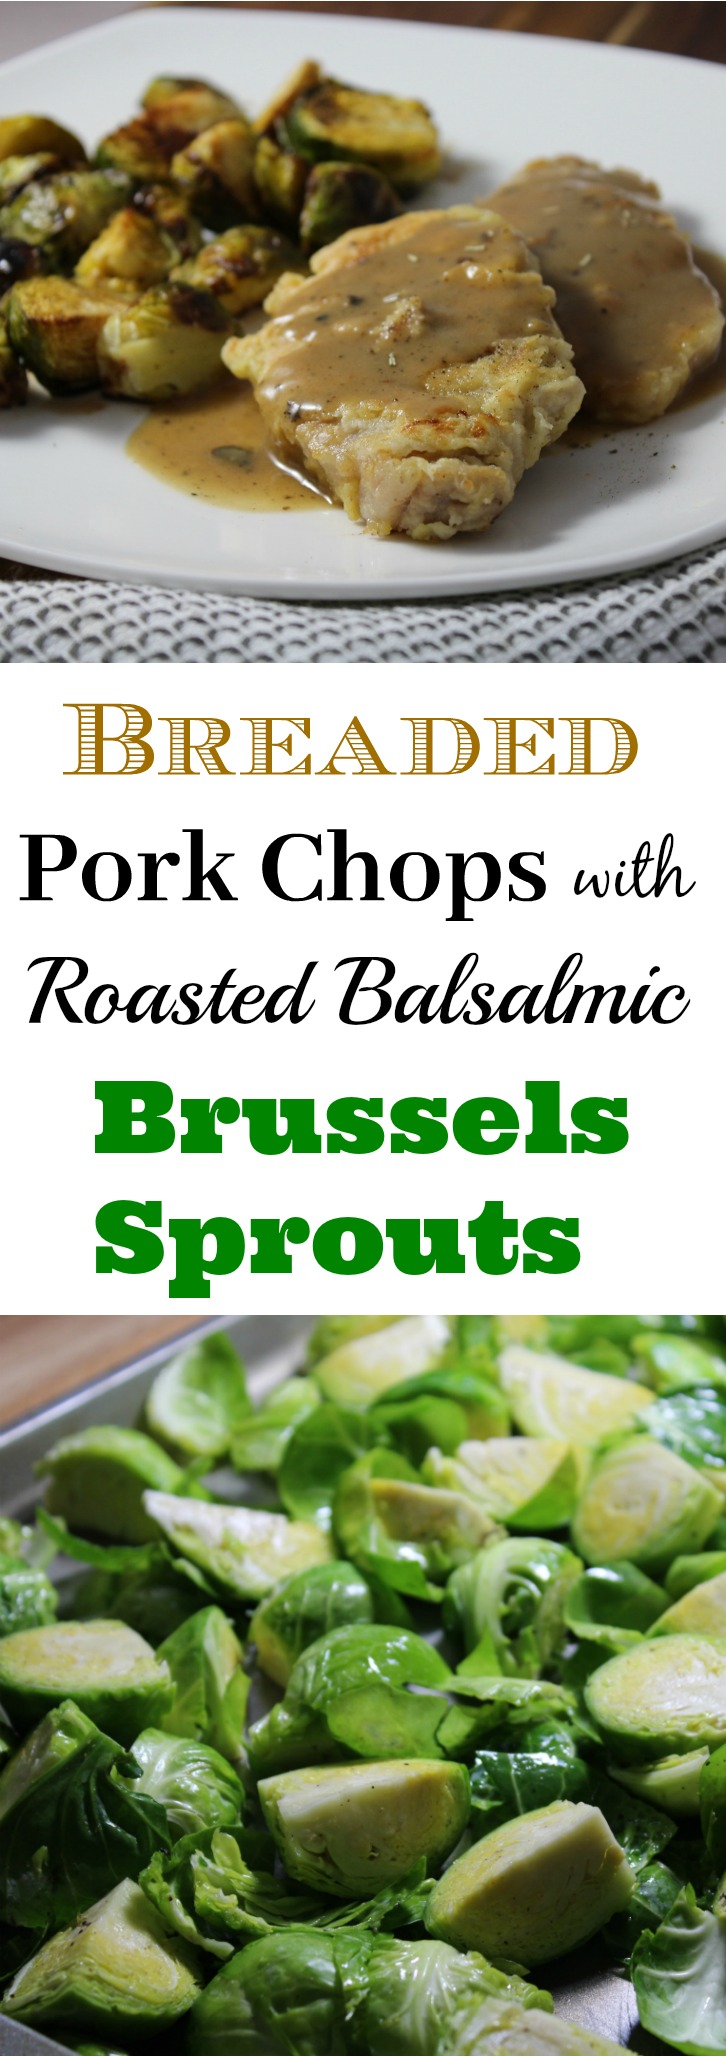 Breaded Pork Chops with Roasted Balsamic Brussels Sprouts